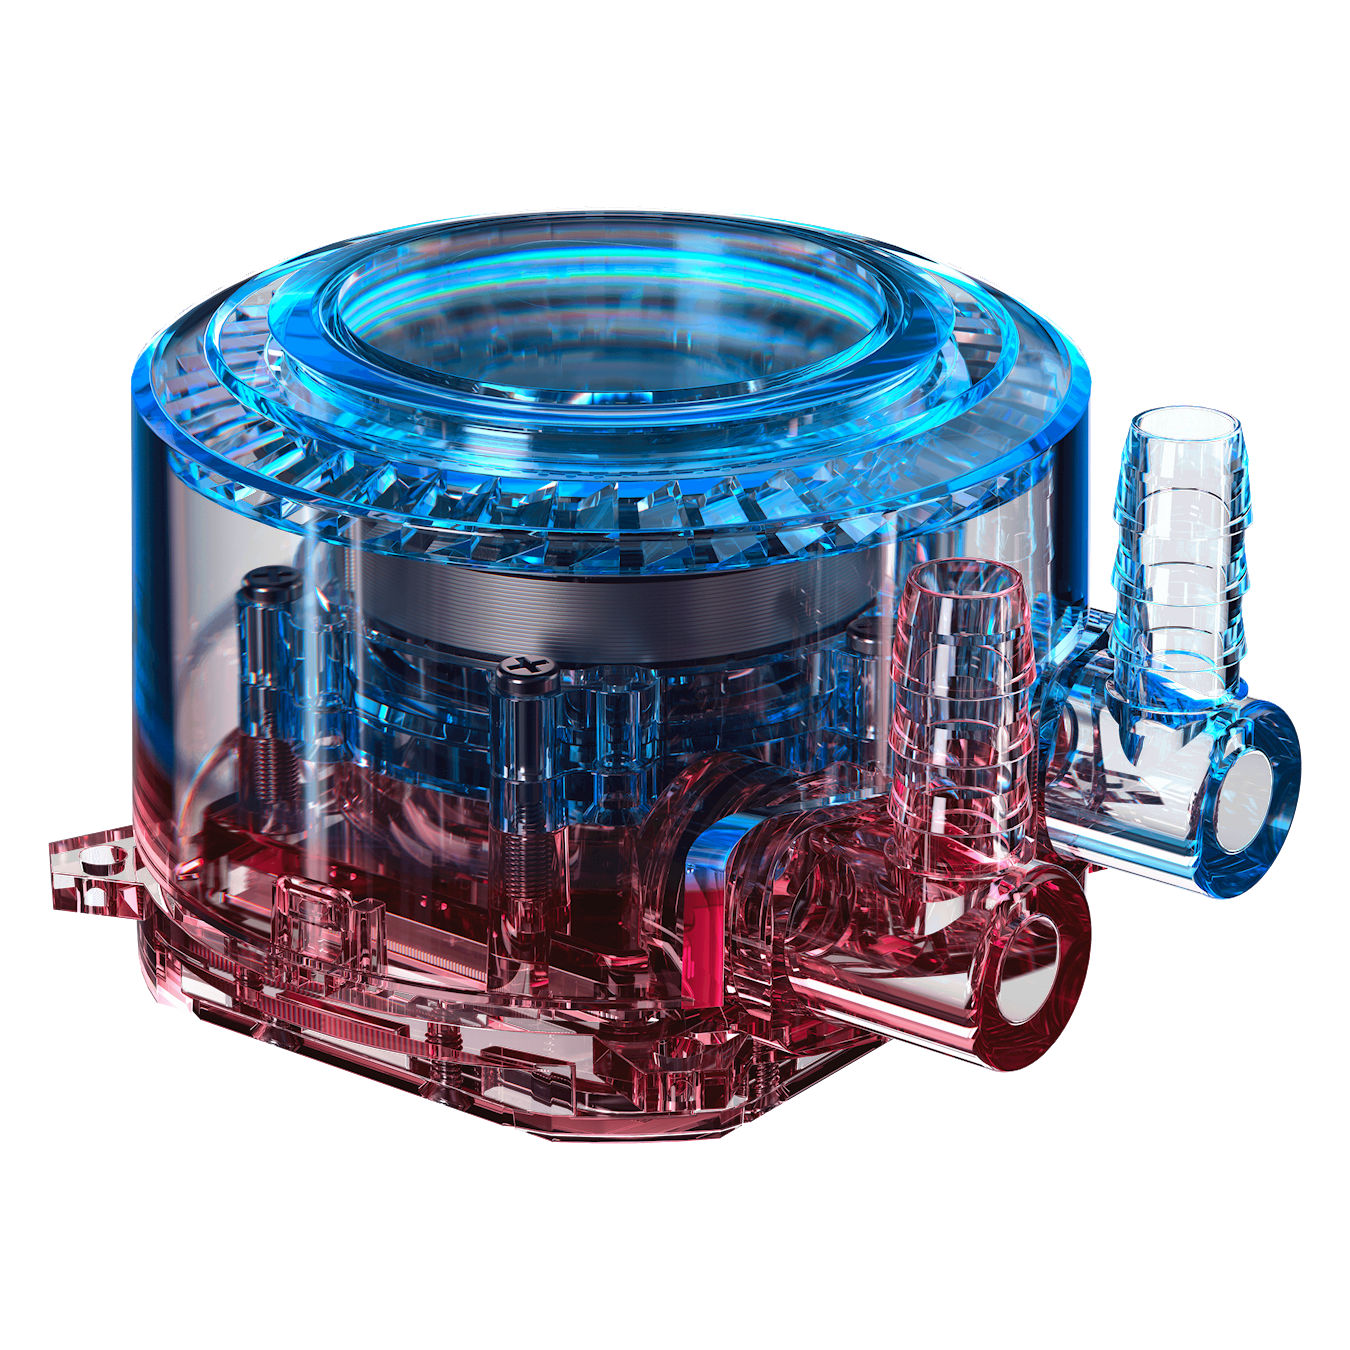 Our low-profile dual chamber pump enhances performance and durability over our last-gen single chamber pump designs